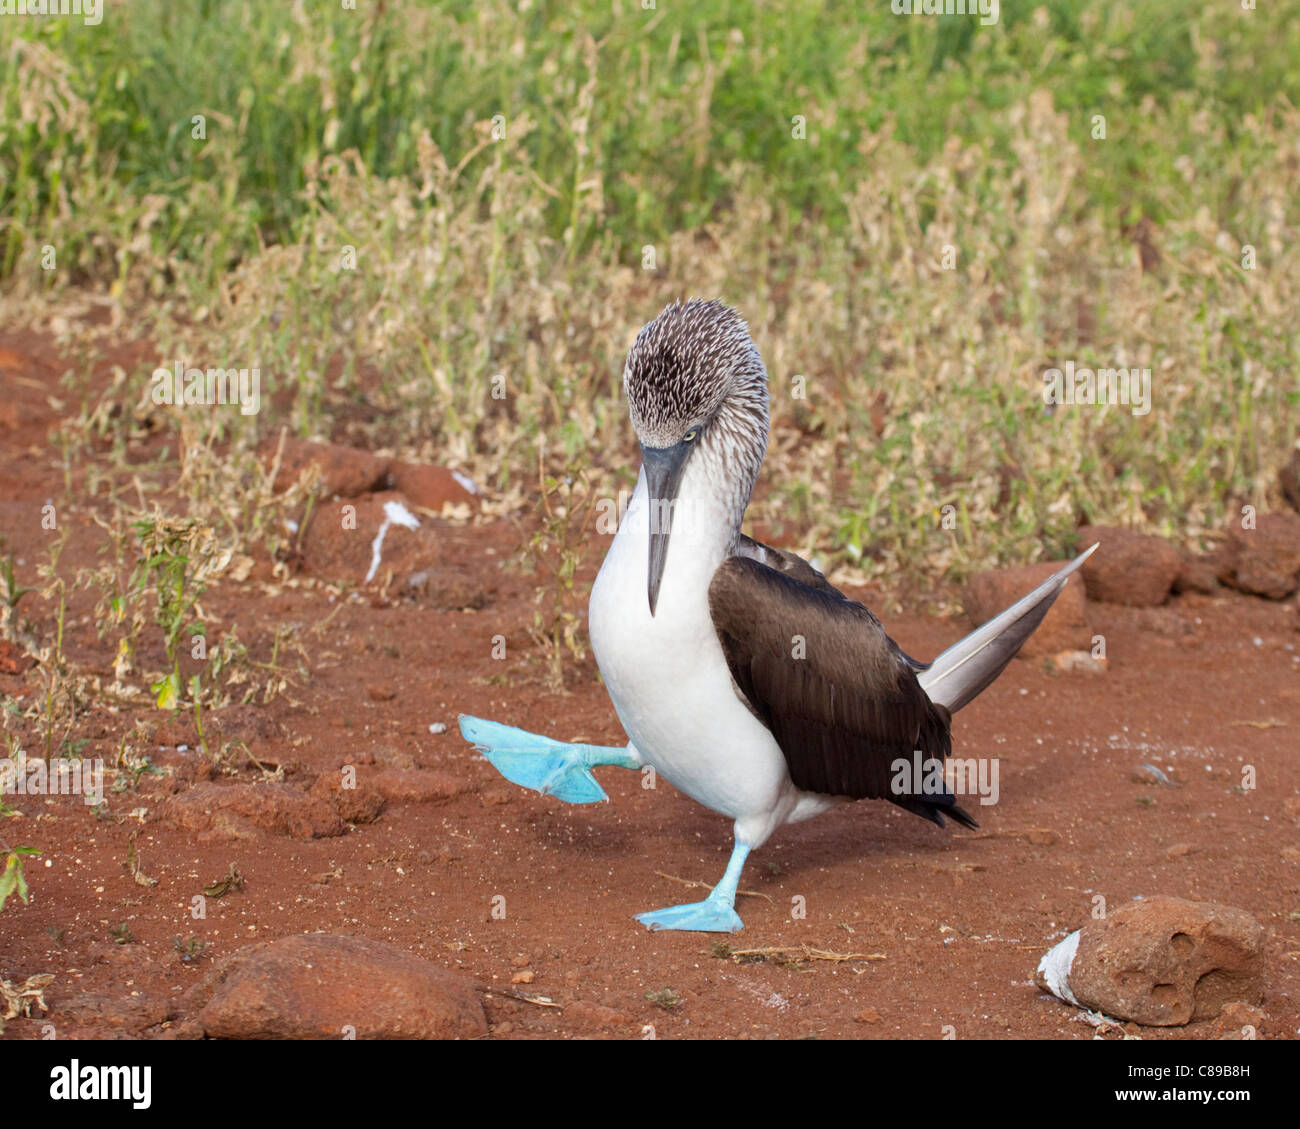 Blue-footed Booby dancing (Sula nebouxii) with one foot raised in courtship dance on North Seymour Island in the Galapagos Islands Stock Photo